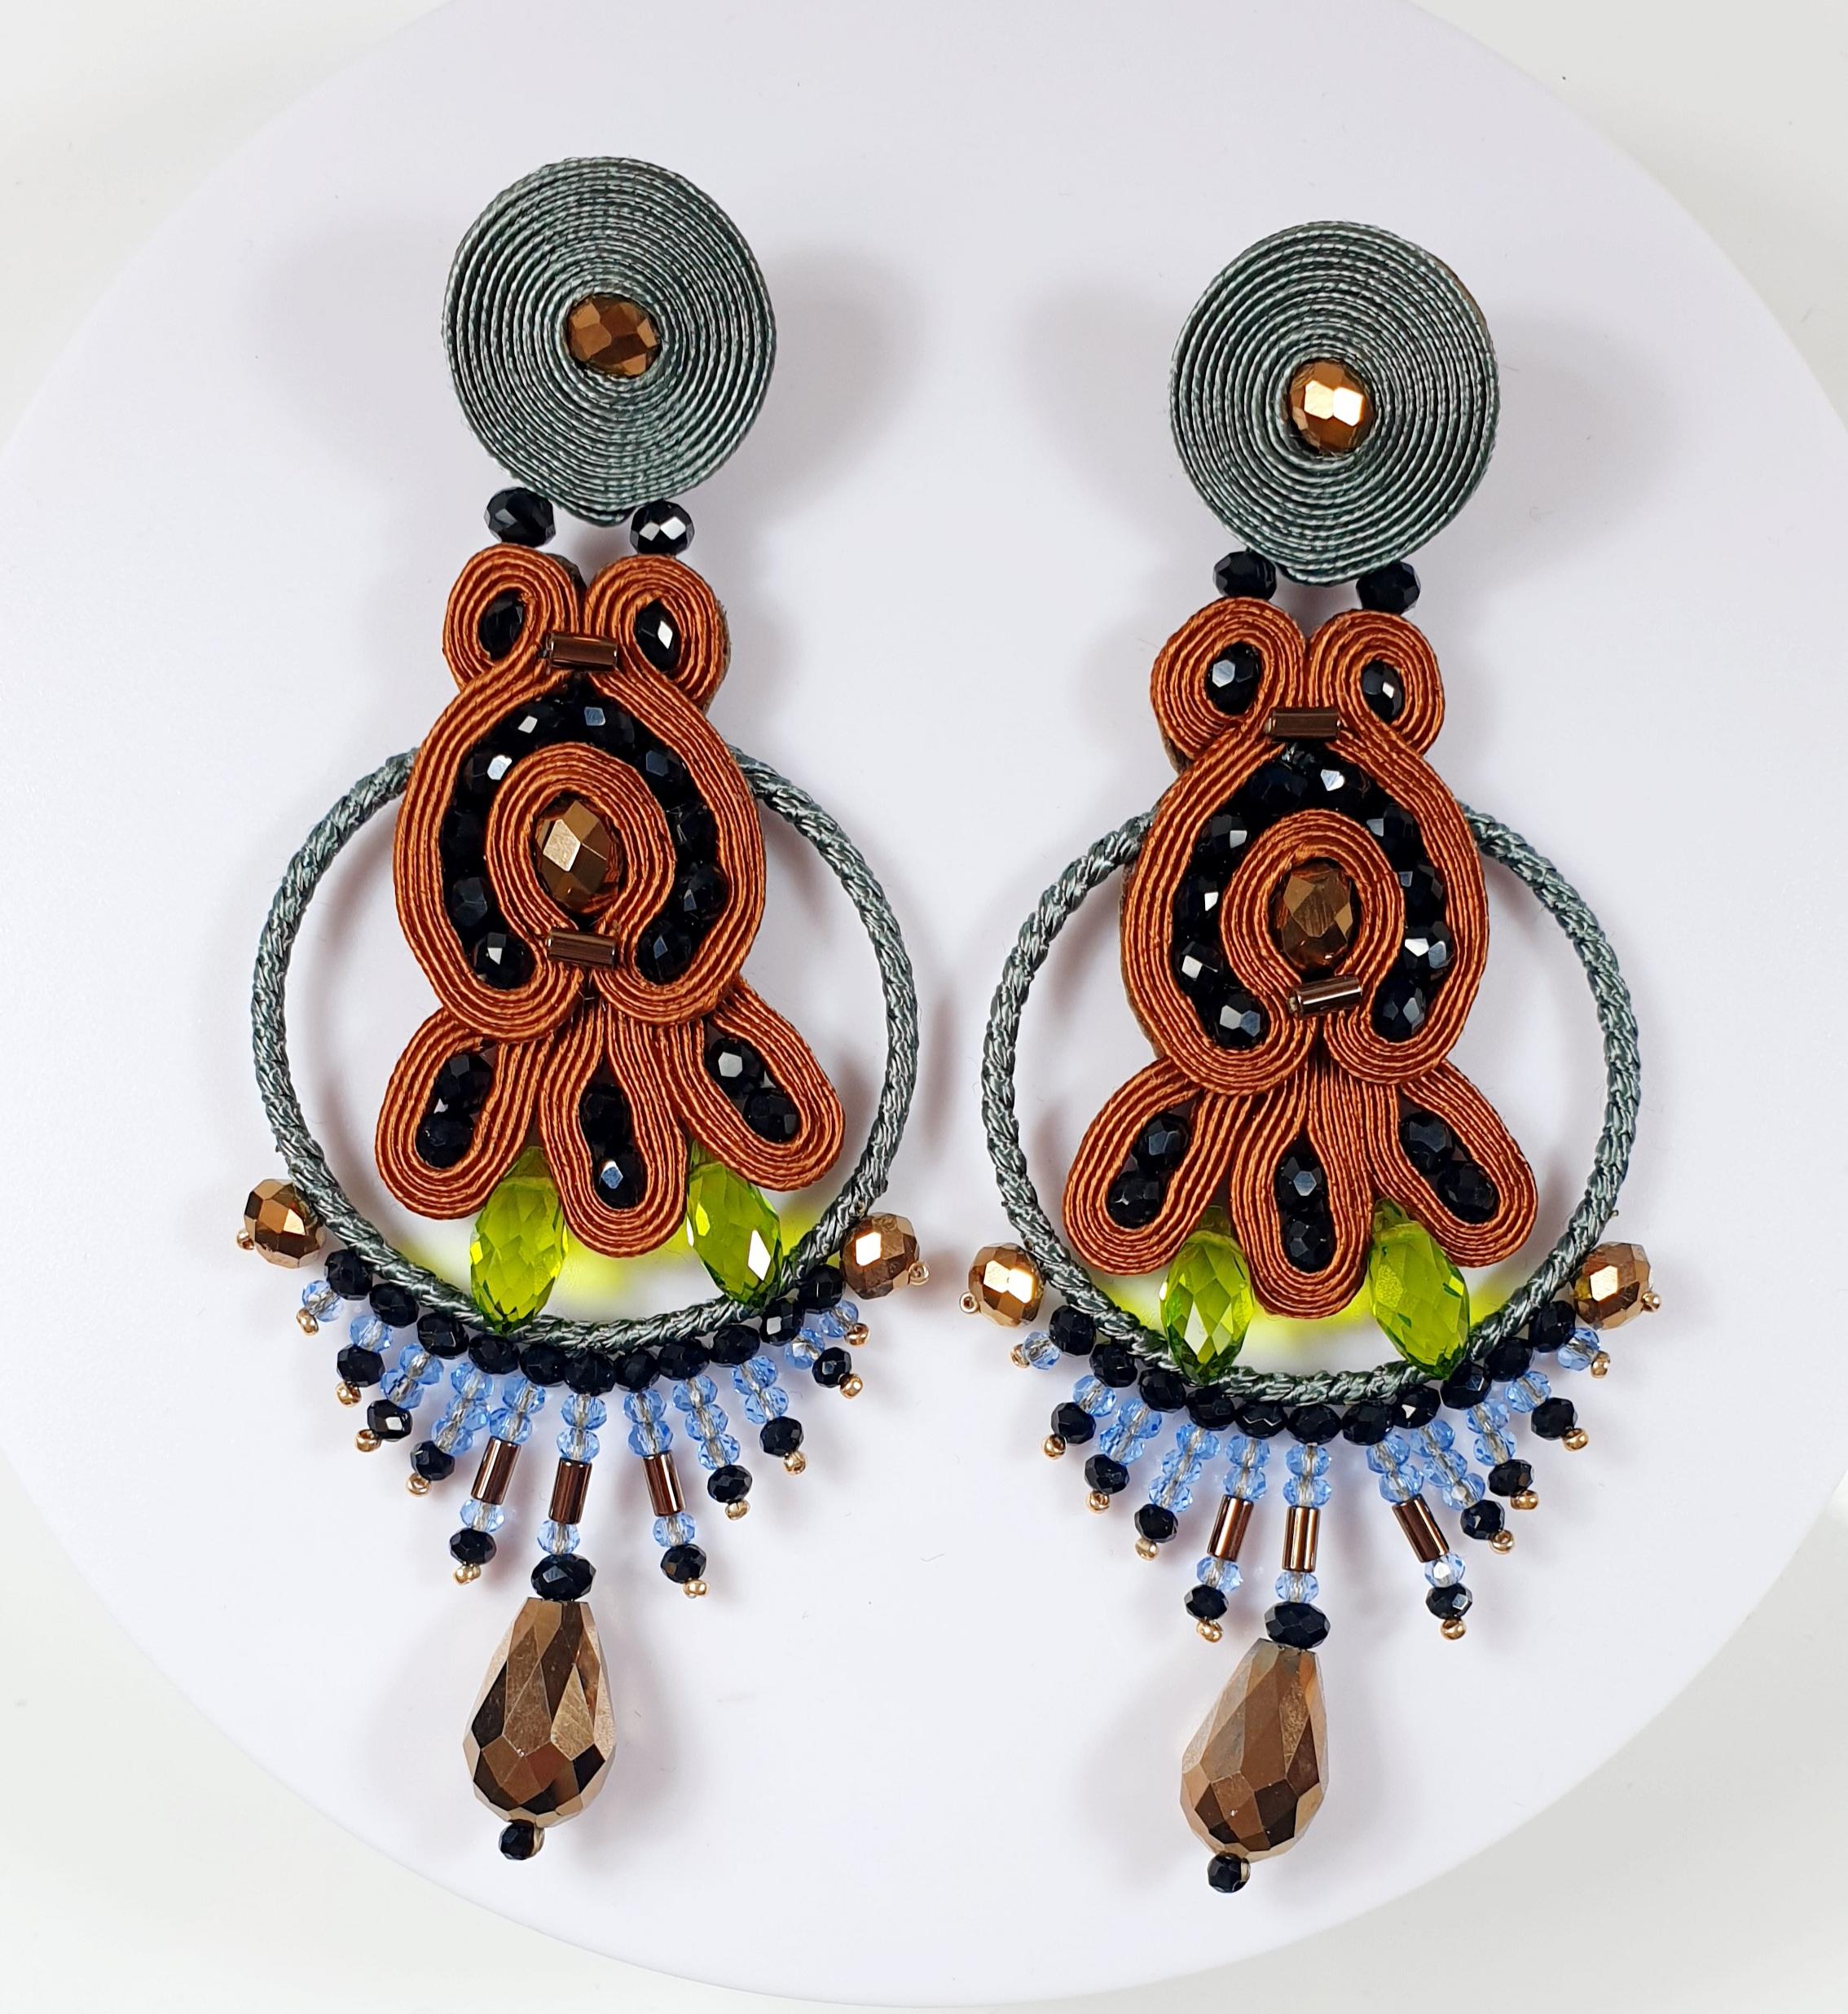 Musula Urban Saint Honore Choco Earrings
Urban Collection is a special homage to sweet lovers.
Soutache earrings made with rayon 2mm, hematites and crystal beads. 
Silver clips lenght 10cm 3.94inches. 
Back finish in natural smooth and thin